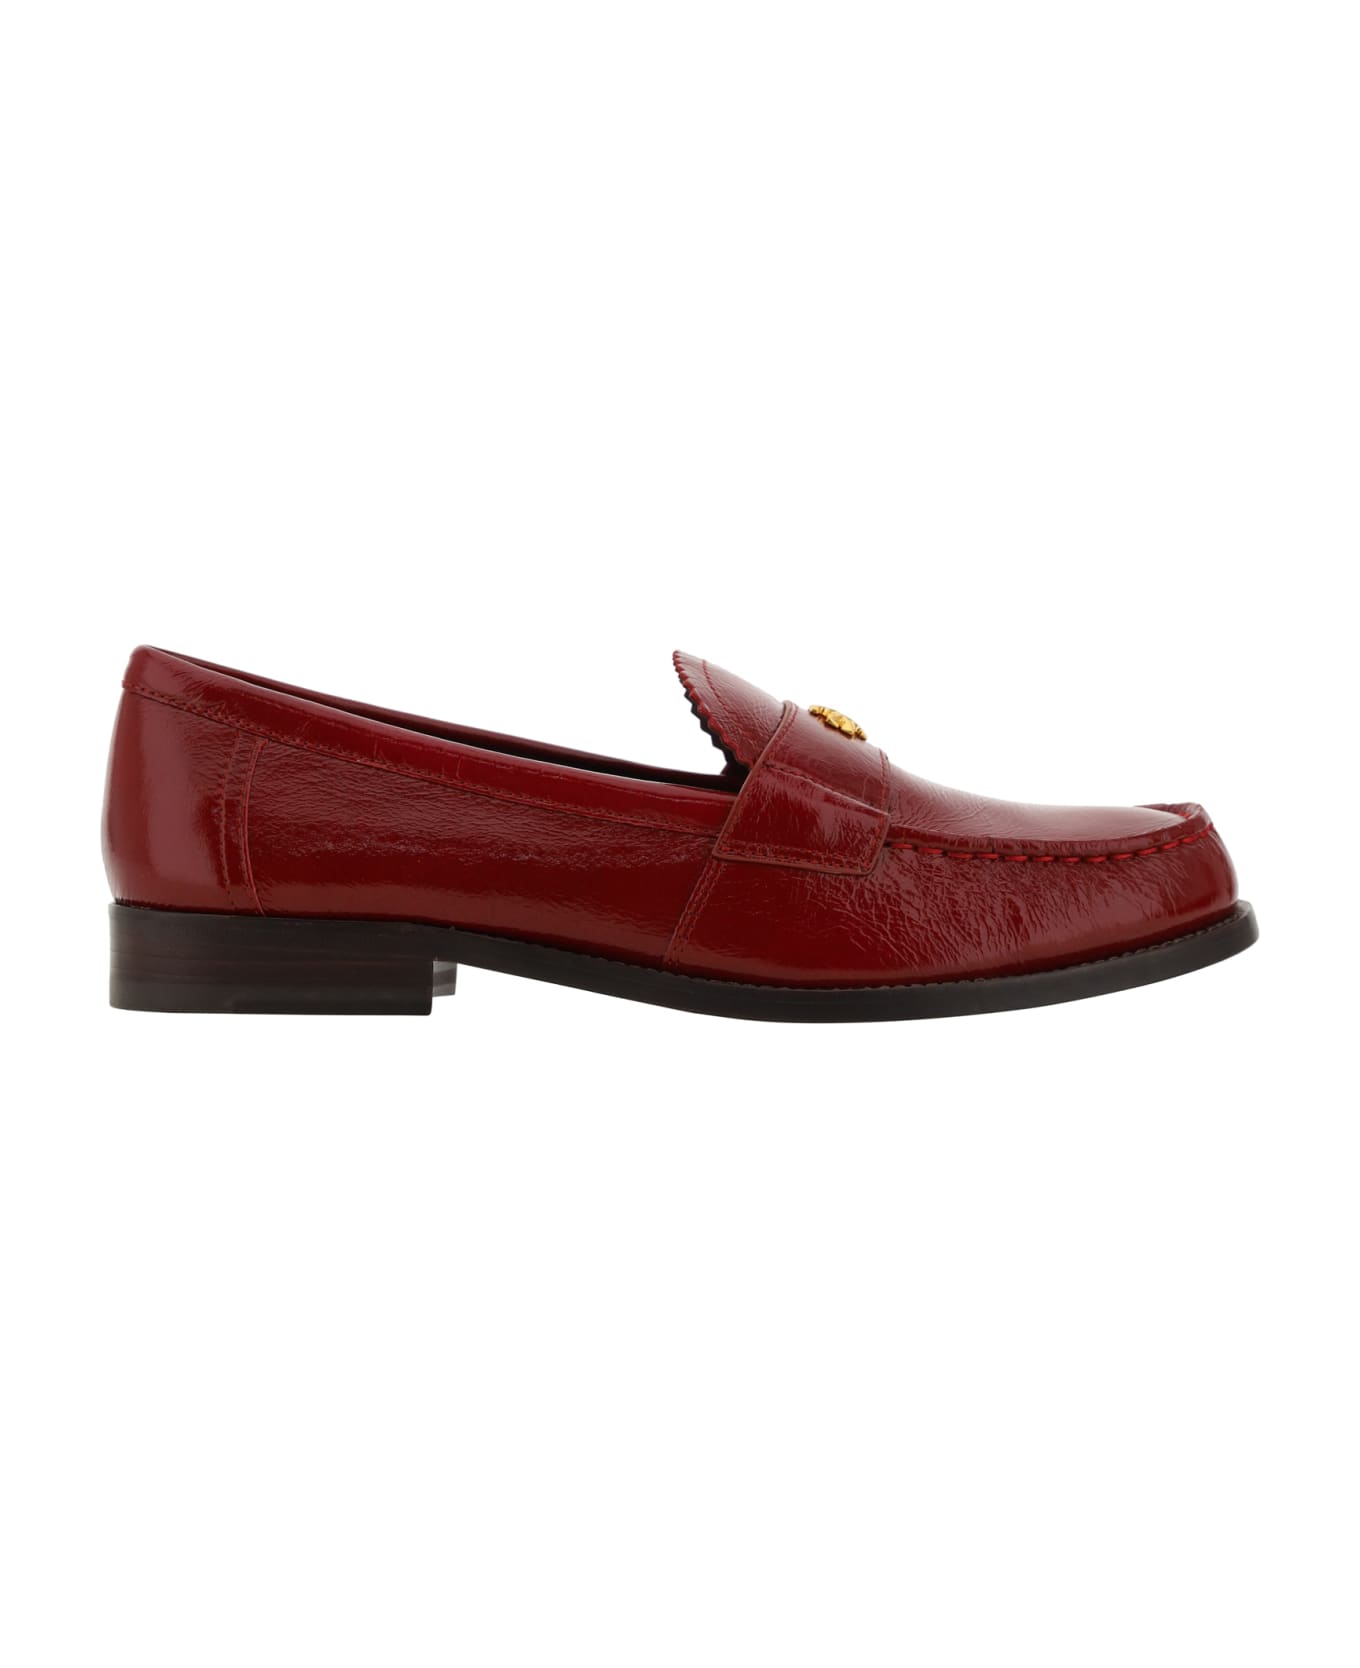 Tory Burch Classic Loafers - Crimson Red